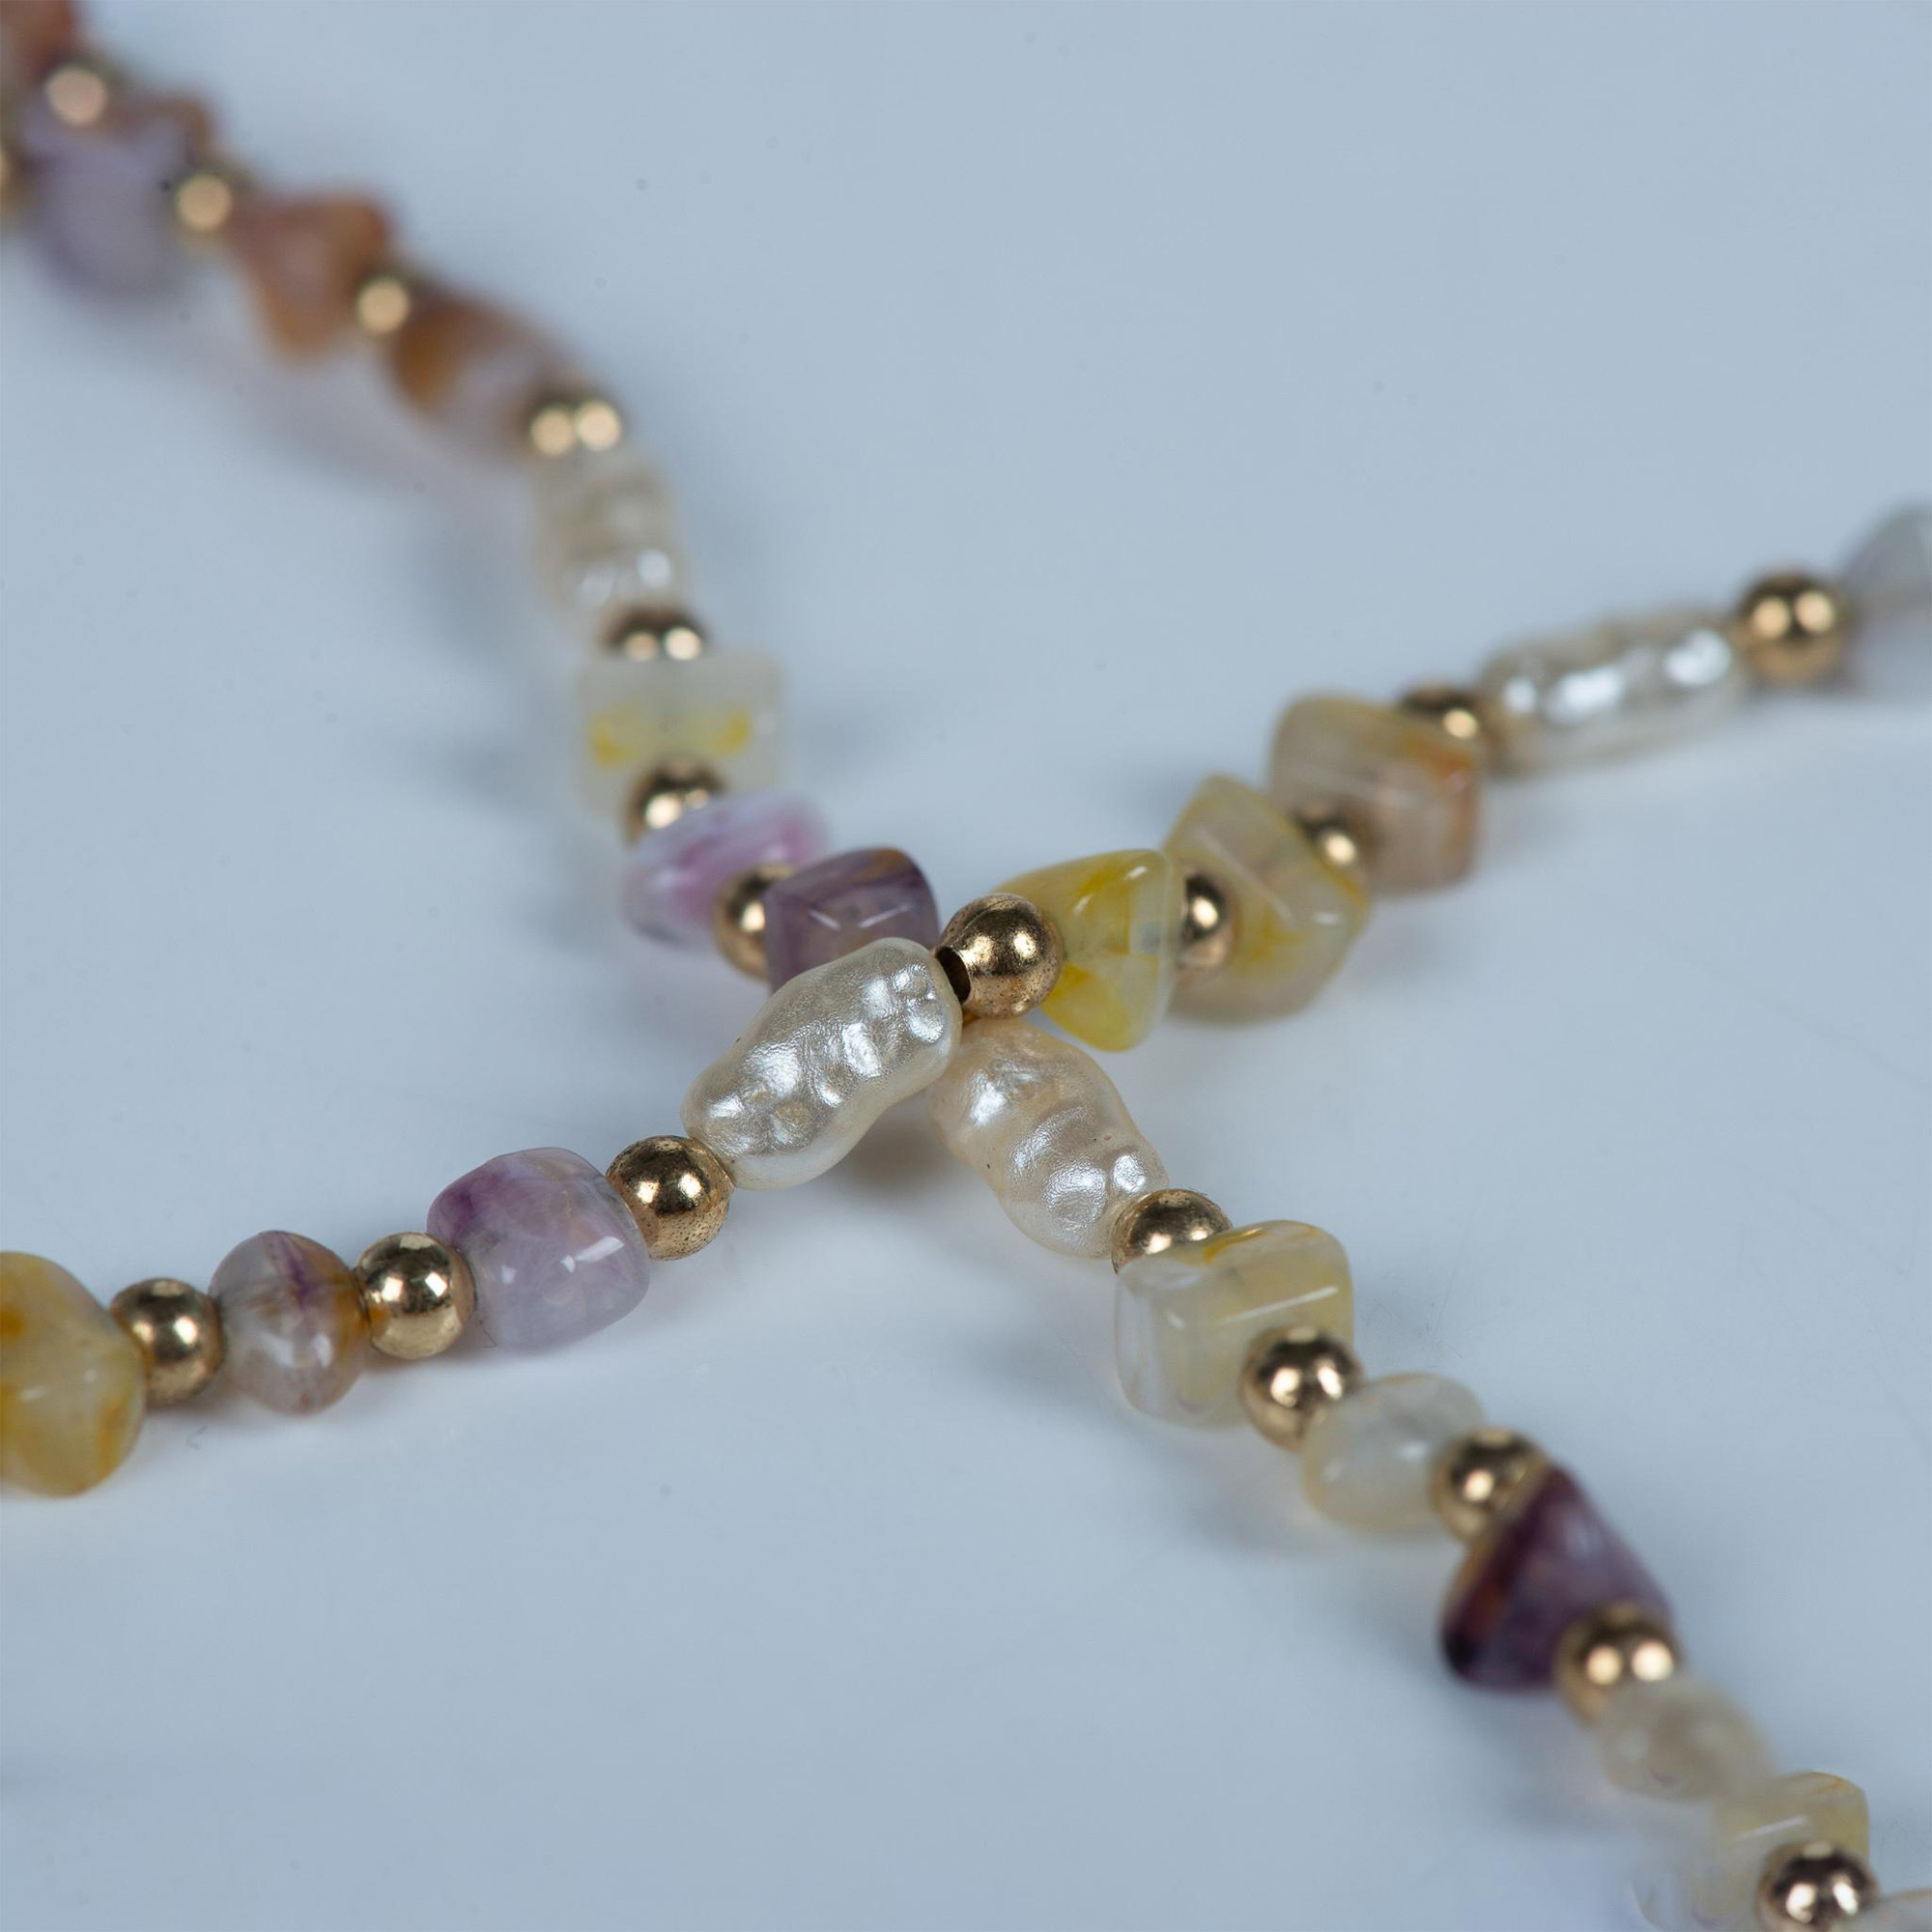 2pc Napier Faux Baroque Pearl & Gemstone Chip Necklaces - Image 3 of 4